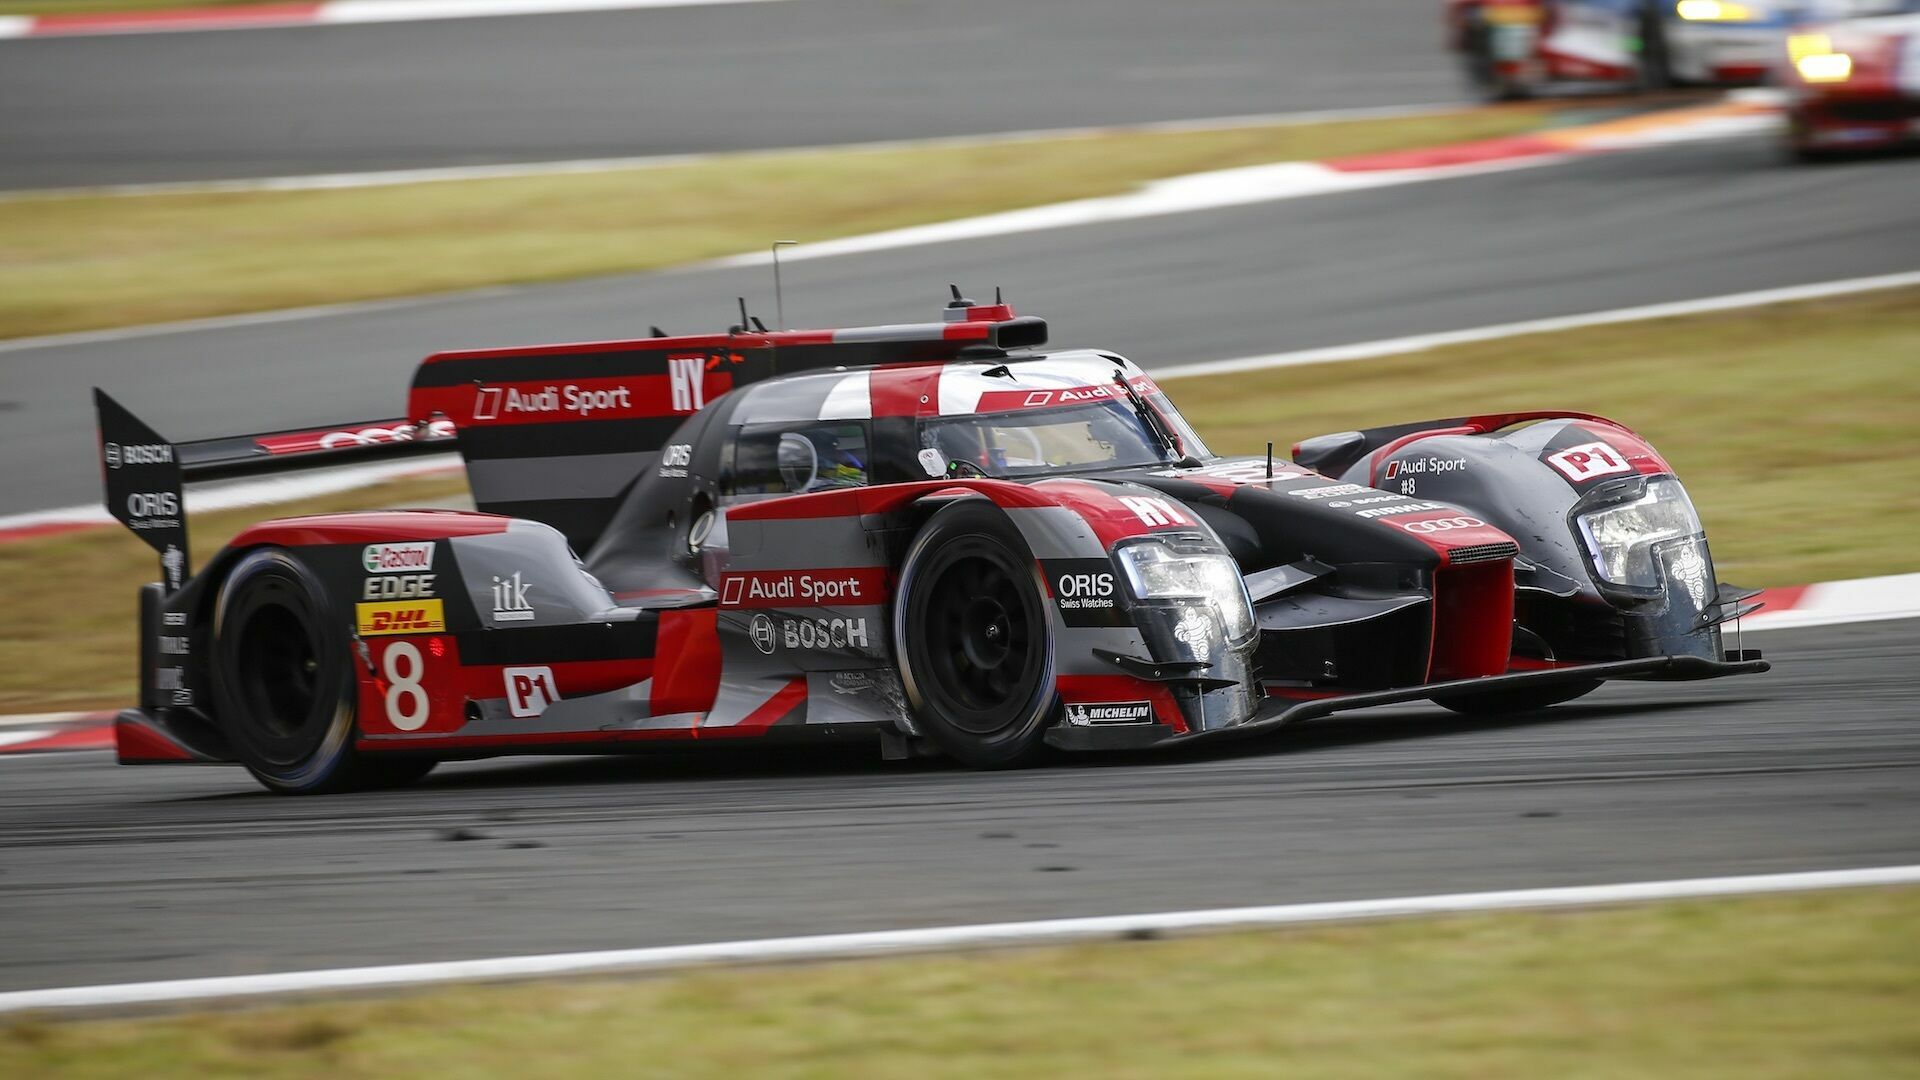 WEC Fuji - Audi second after a thrilling race